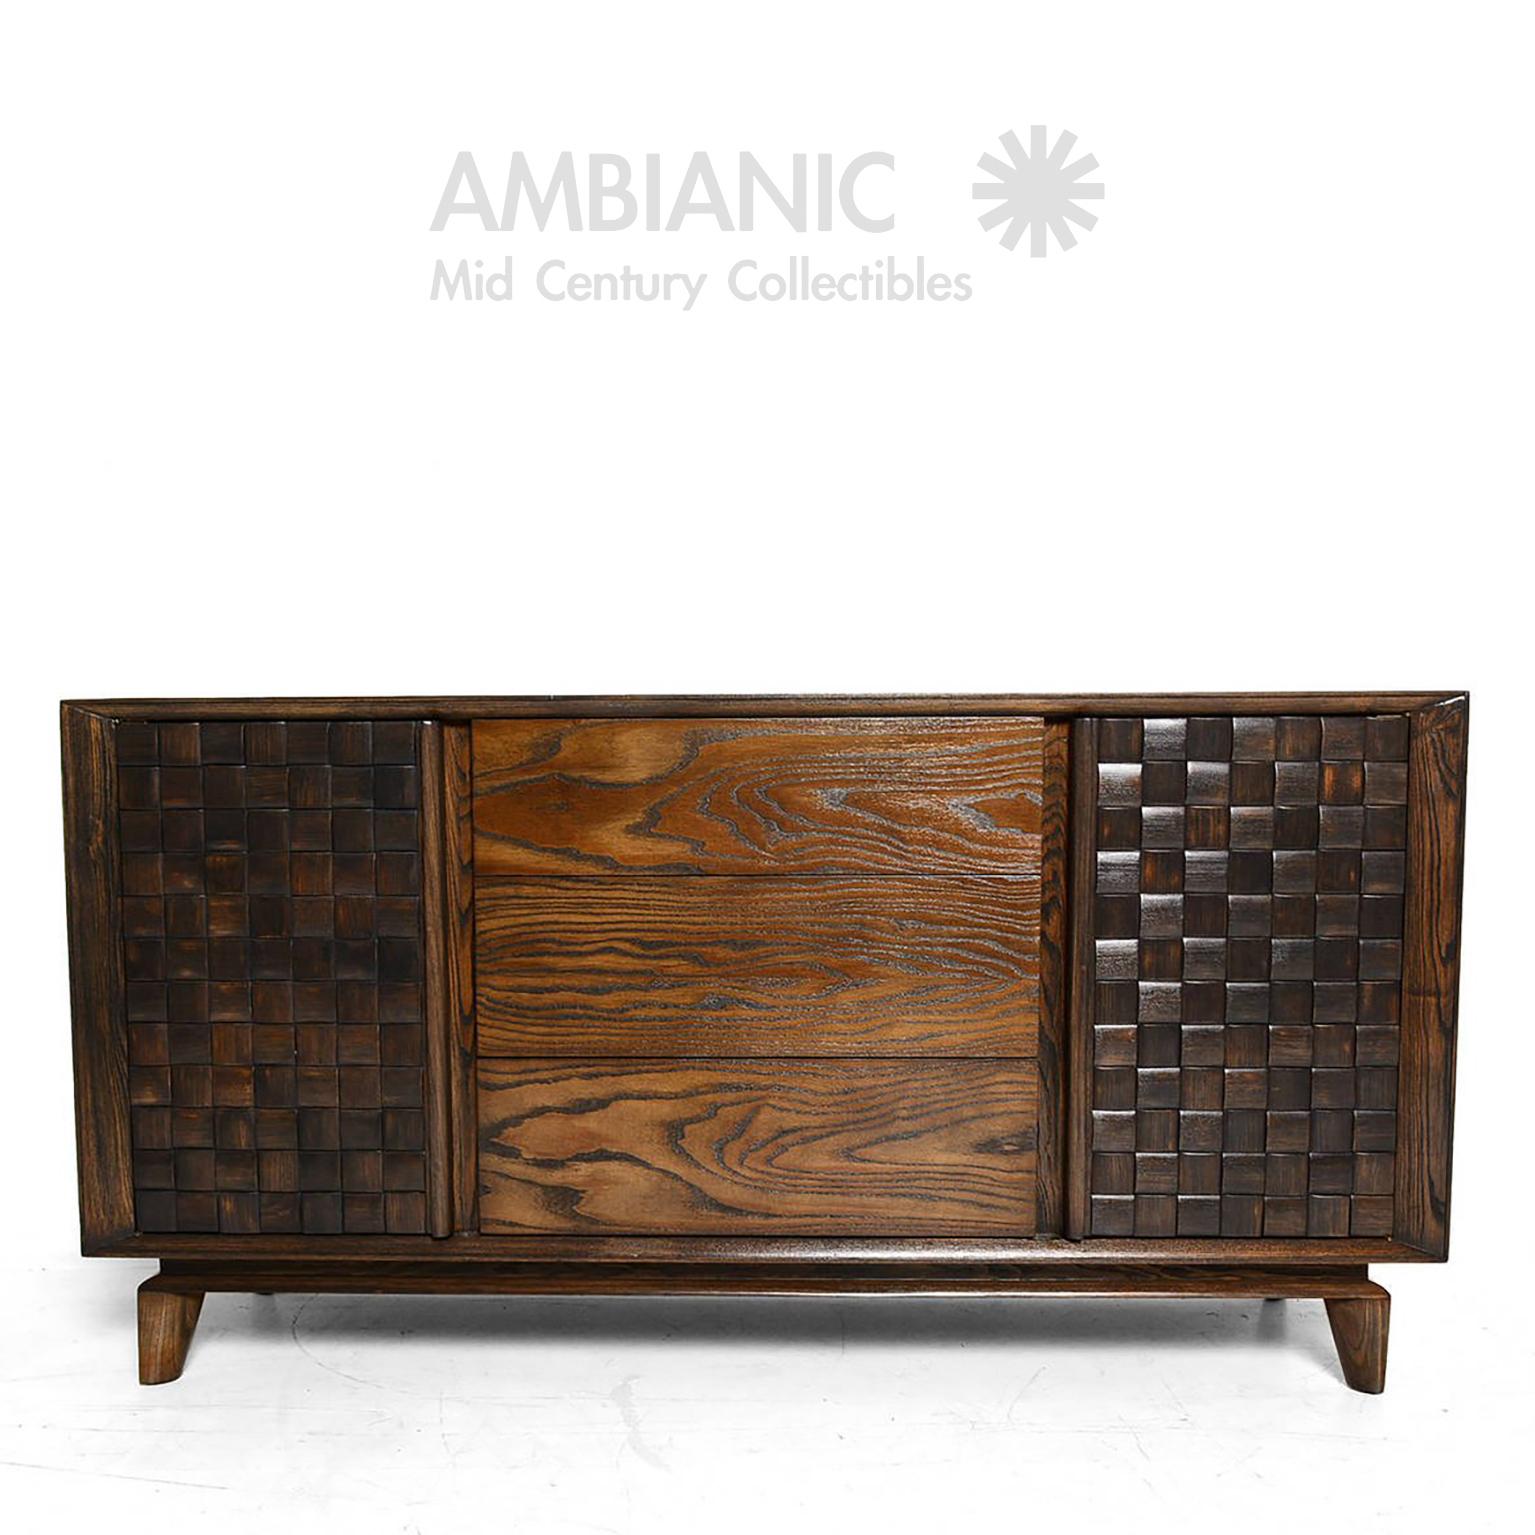 An oak credenza buffet in a basket weave checkered design by architect  interior designer Paul Laszlo for Brown Saltman, USA, 1955. Timeless elegance. Fabulous Fifties.
Credenza has two open storage areas with shelves and three pull-out drawers. All